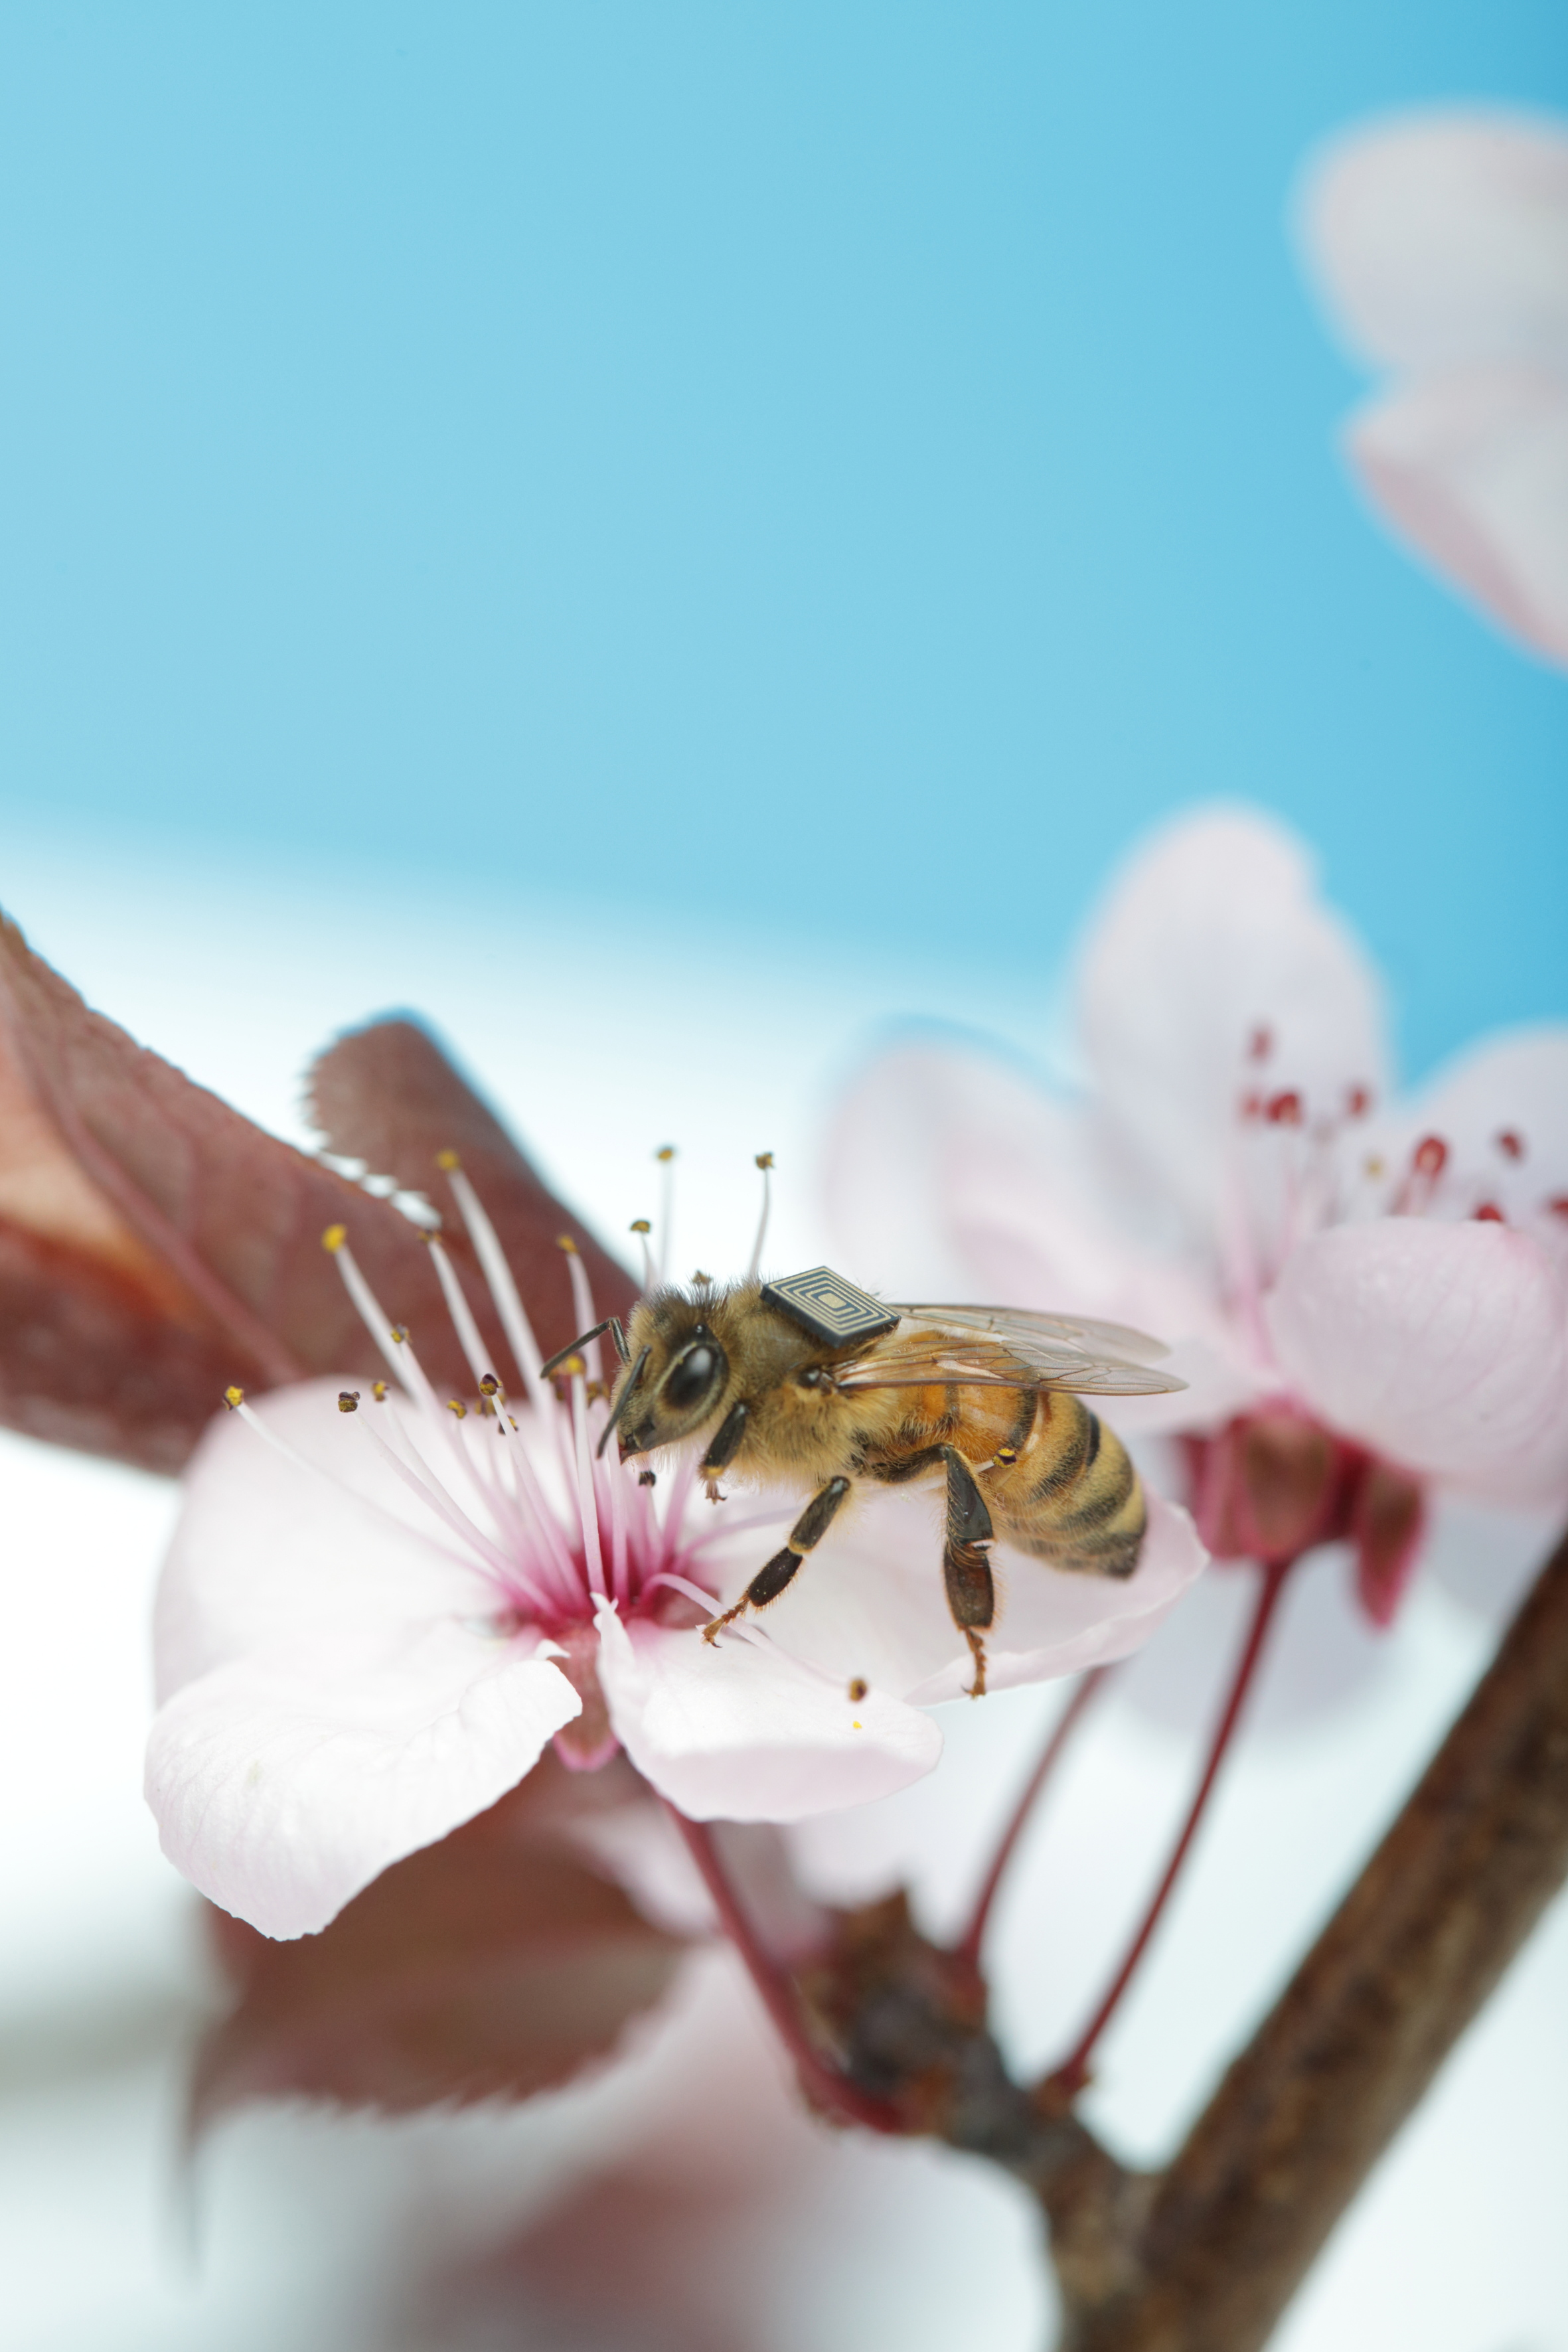 The impact of losing the free pollination services provided by feral honey bees will be farmers paying beekeepers to bring bees in to pollinate their crops, resulting in price hikes in everything from cucumbers and oranges, to cashews and onions.